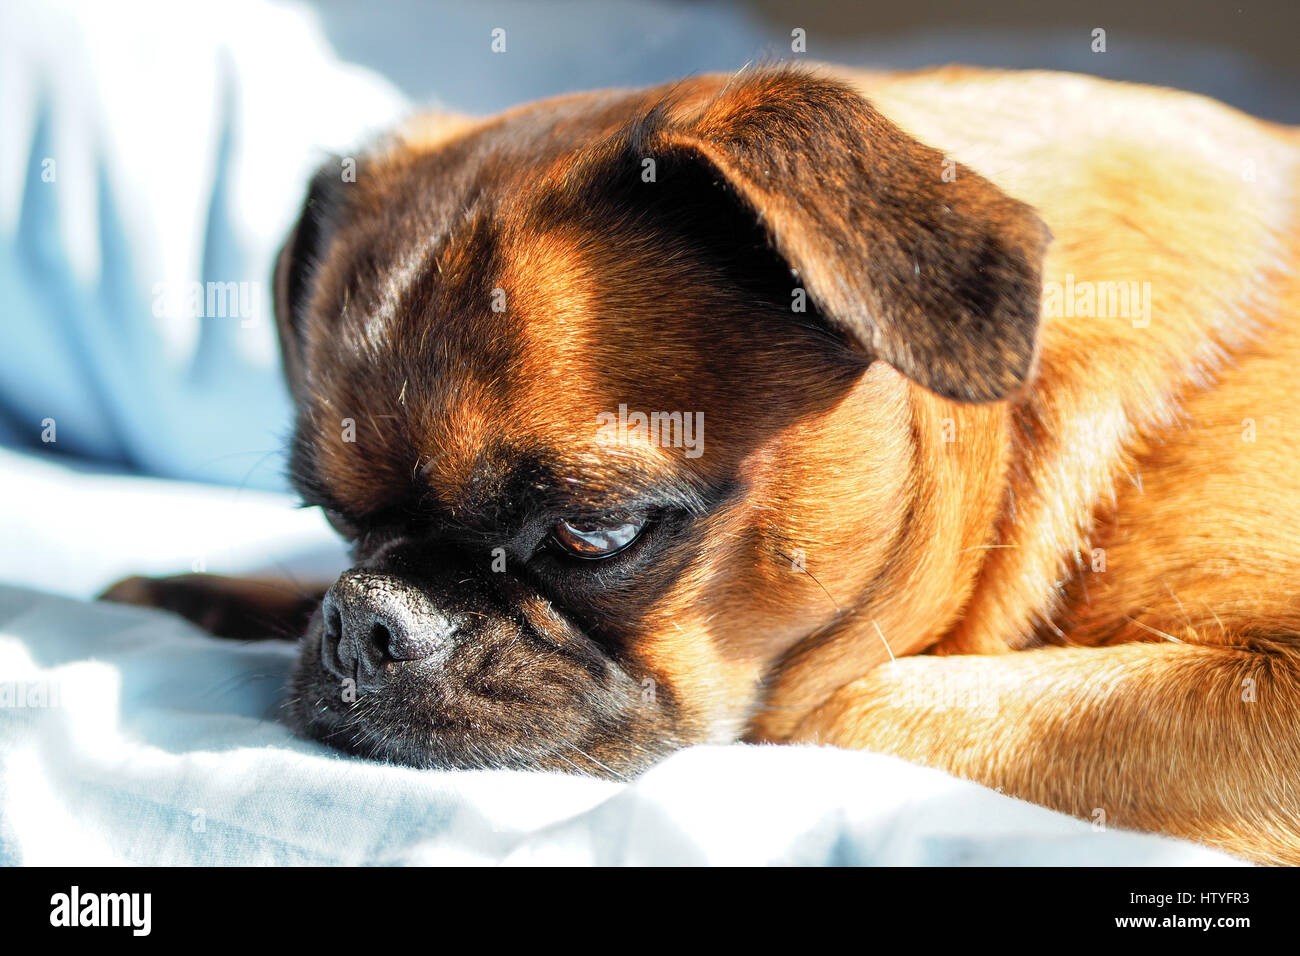 Brussels griffon on a bed Stock Photo